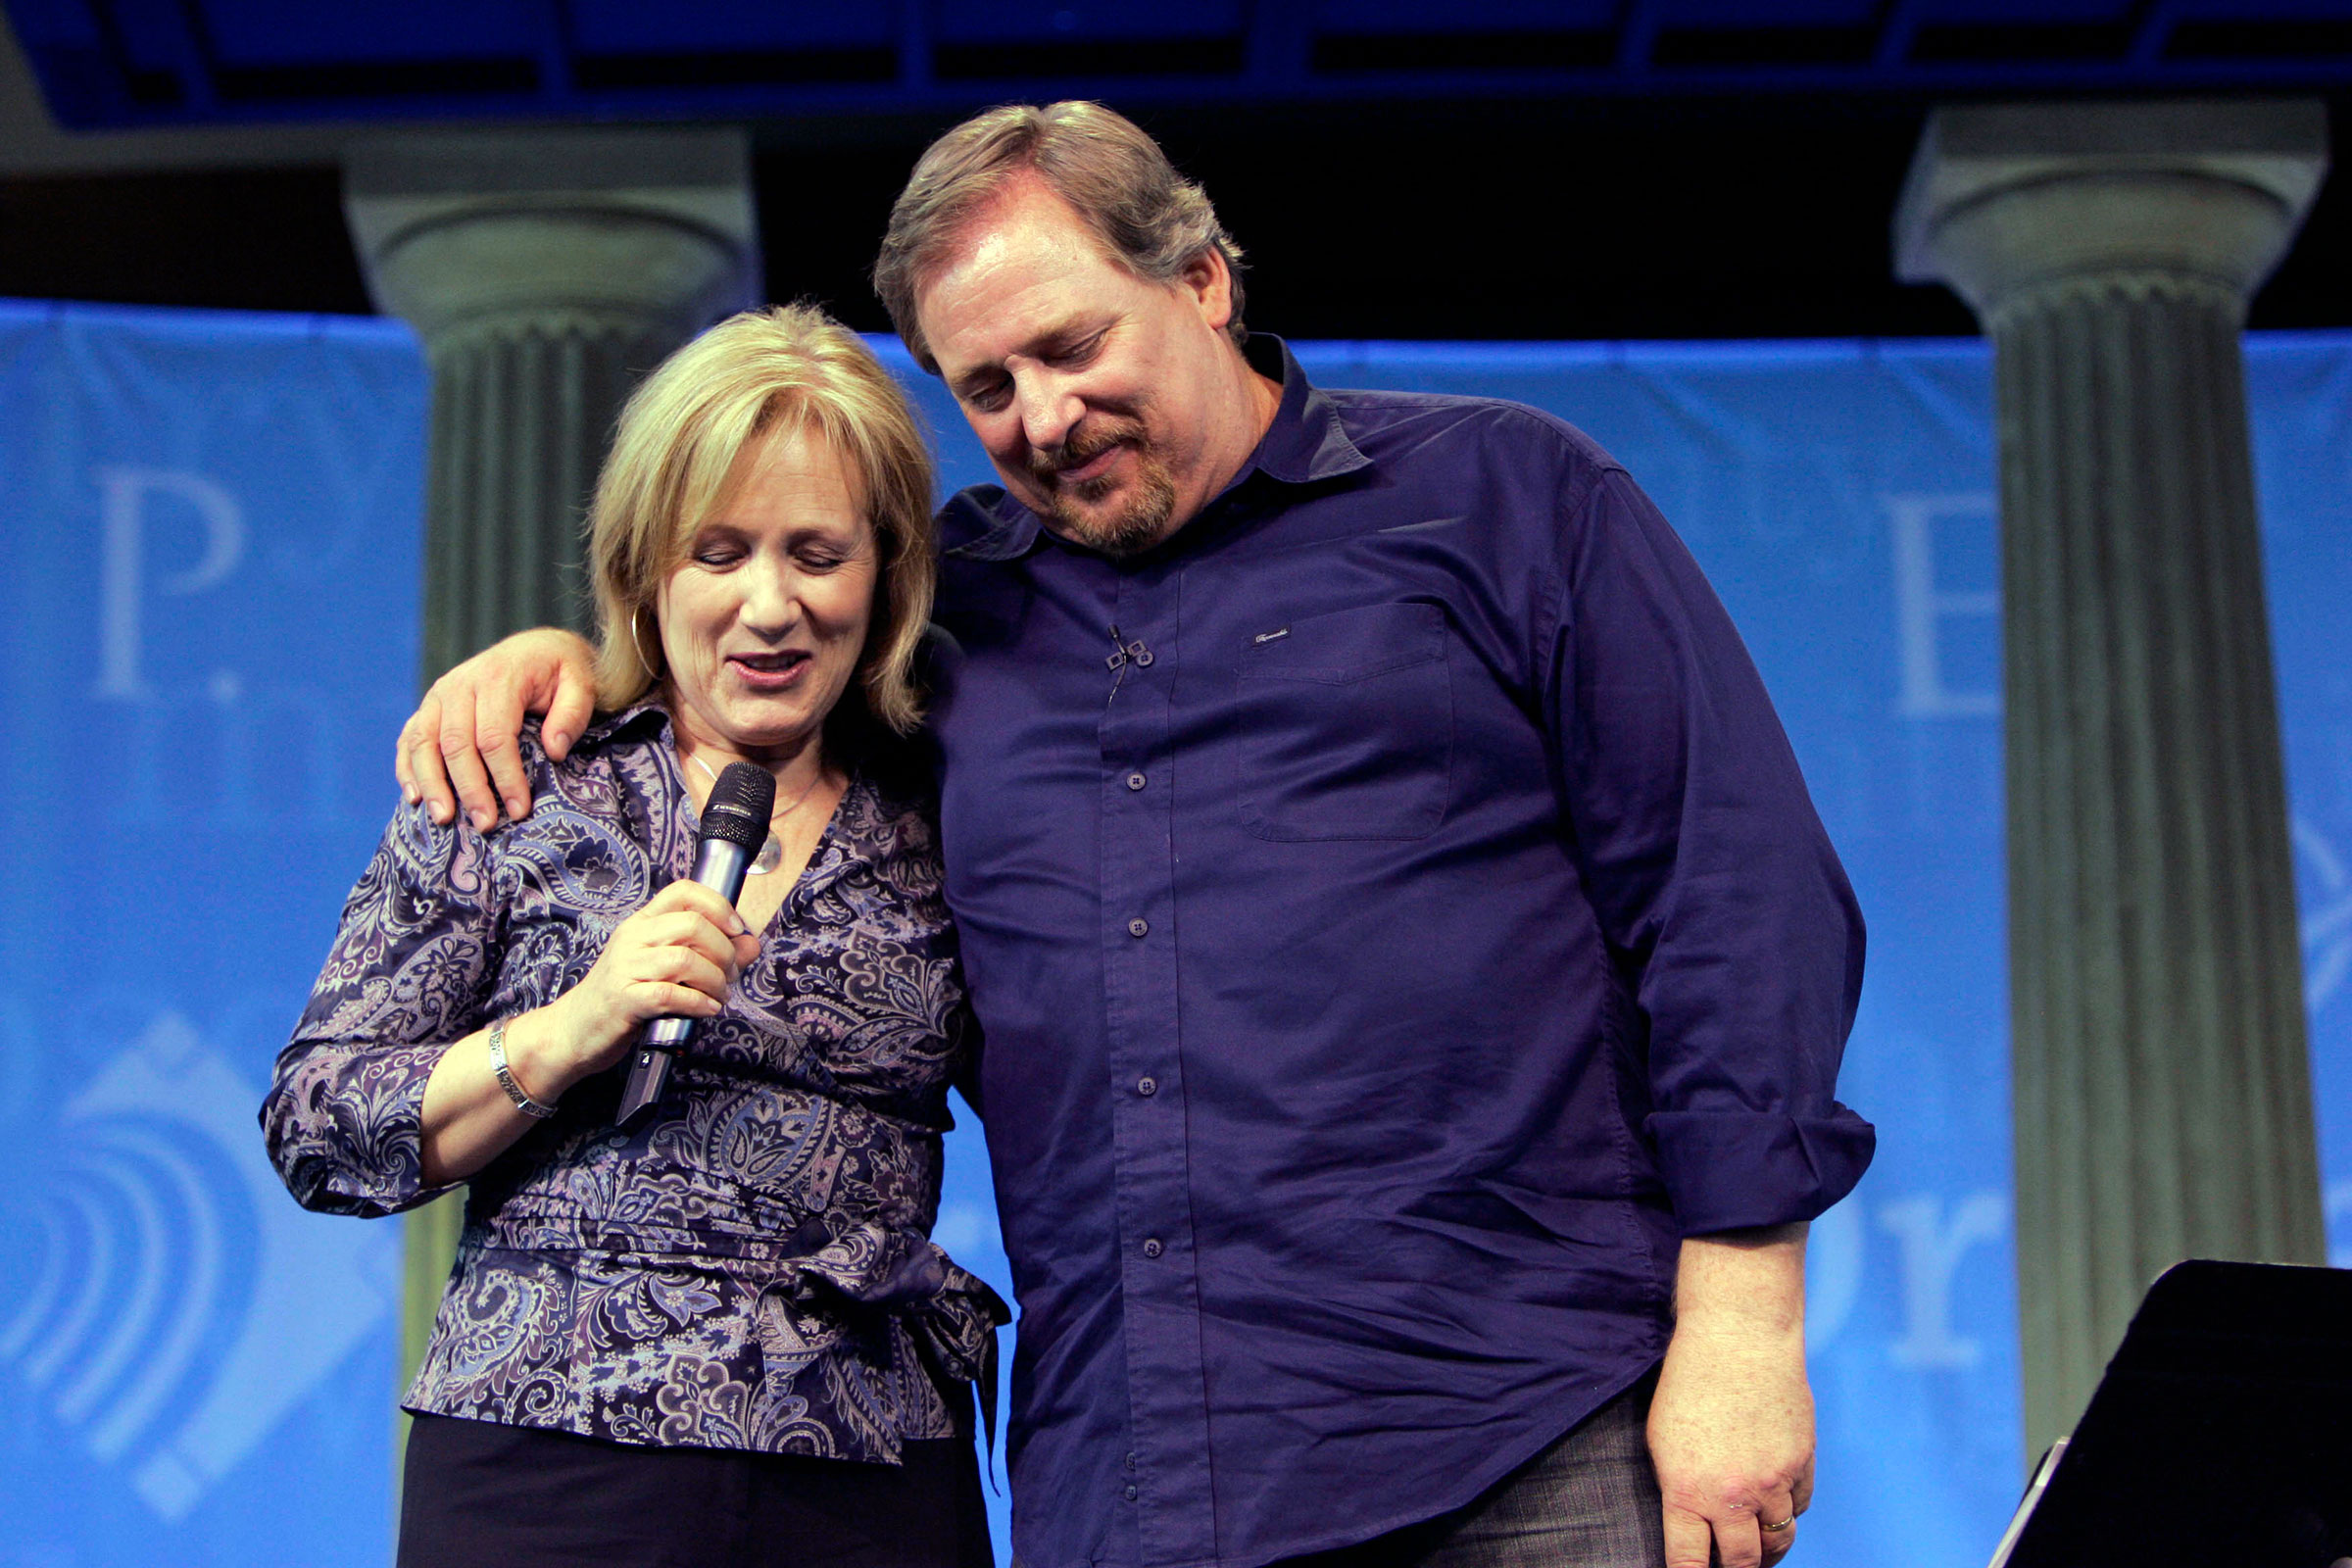 Kay Warren, left, is joined by her husband Pastor Rick Warren, as she leads a prayer at Saddleback Church in Lake Forest, May 20, 2008. (Ann Johansson—Corbis/Getty Images)